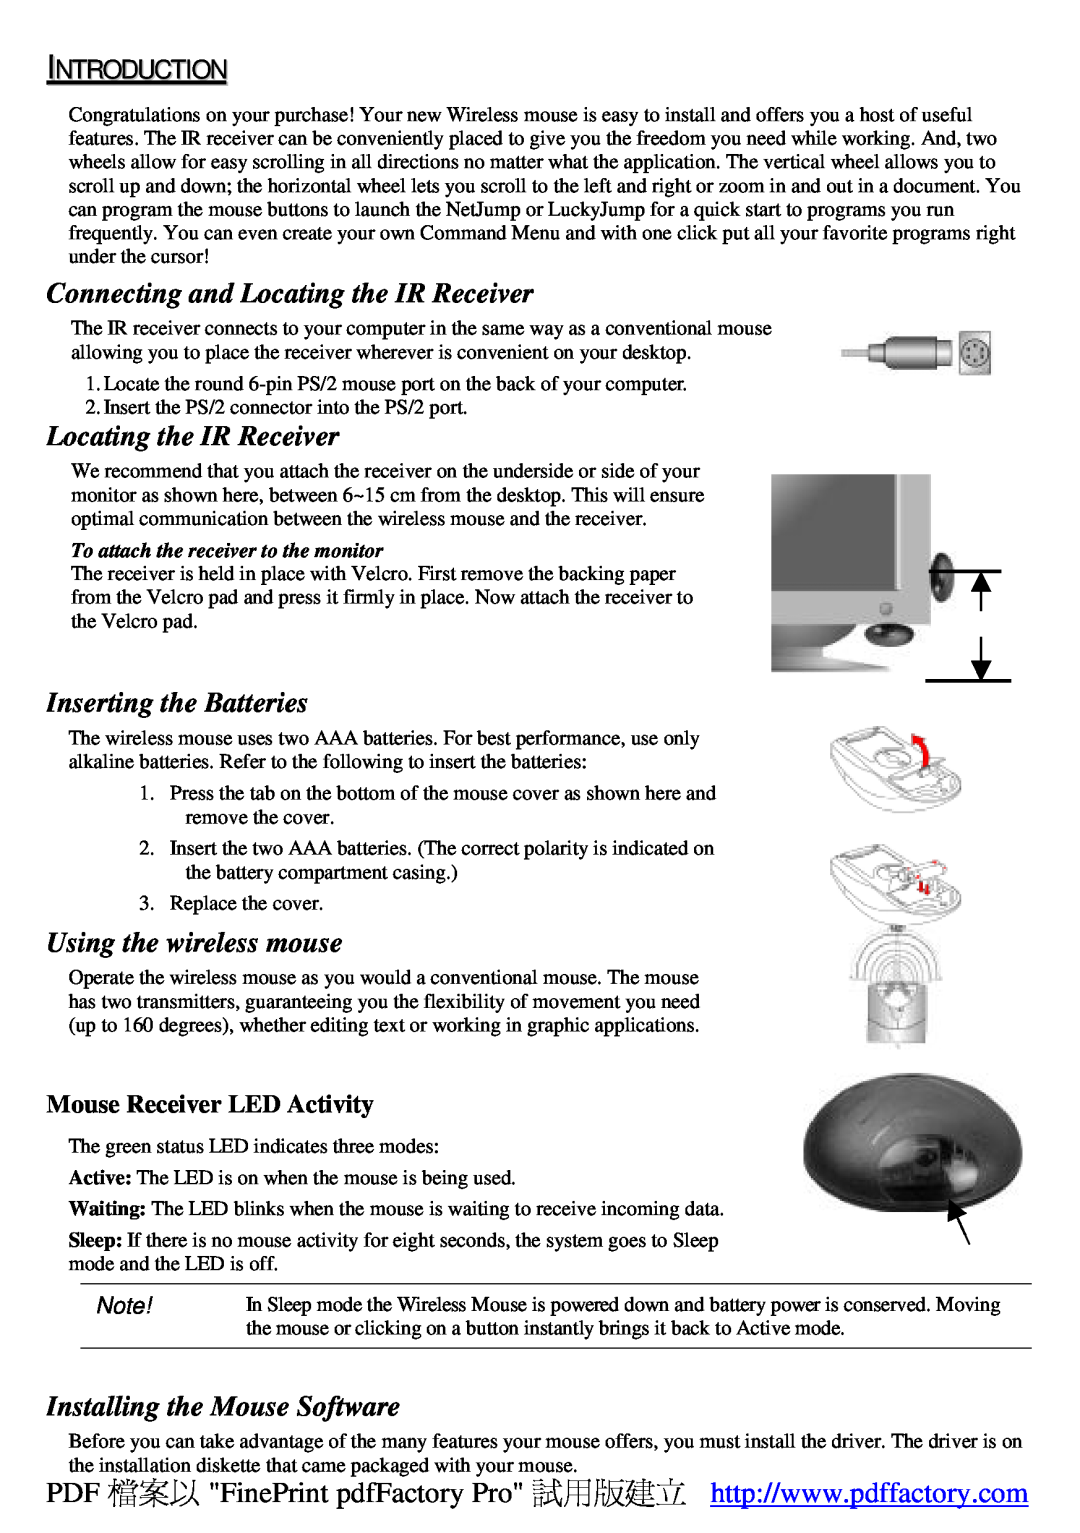 A4 Tech Wireless 1-Wheel Mouse manual Introduction, Connecting and Locating the IR Receiver, Inserting the Batteries 